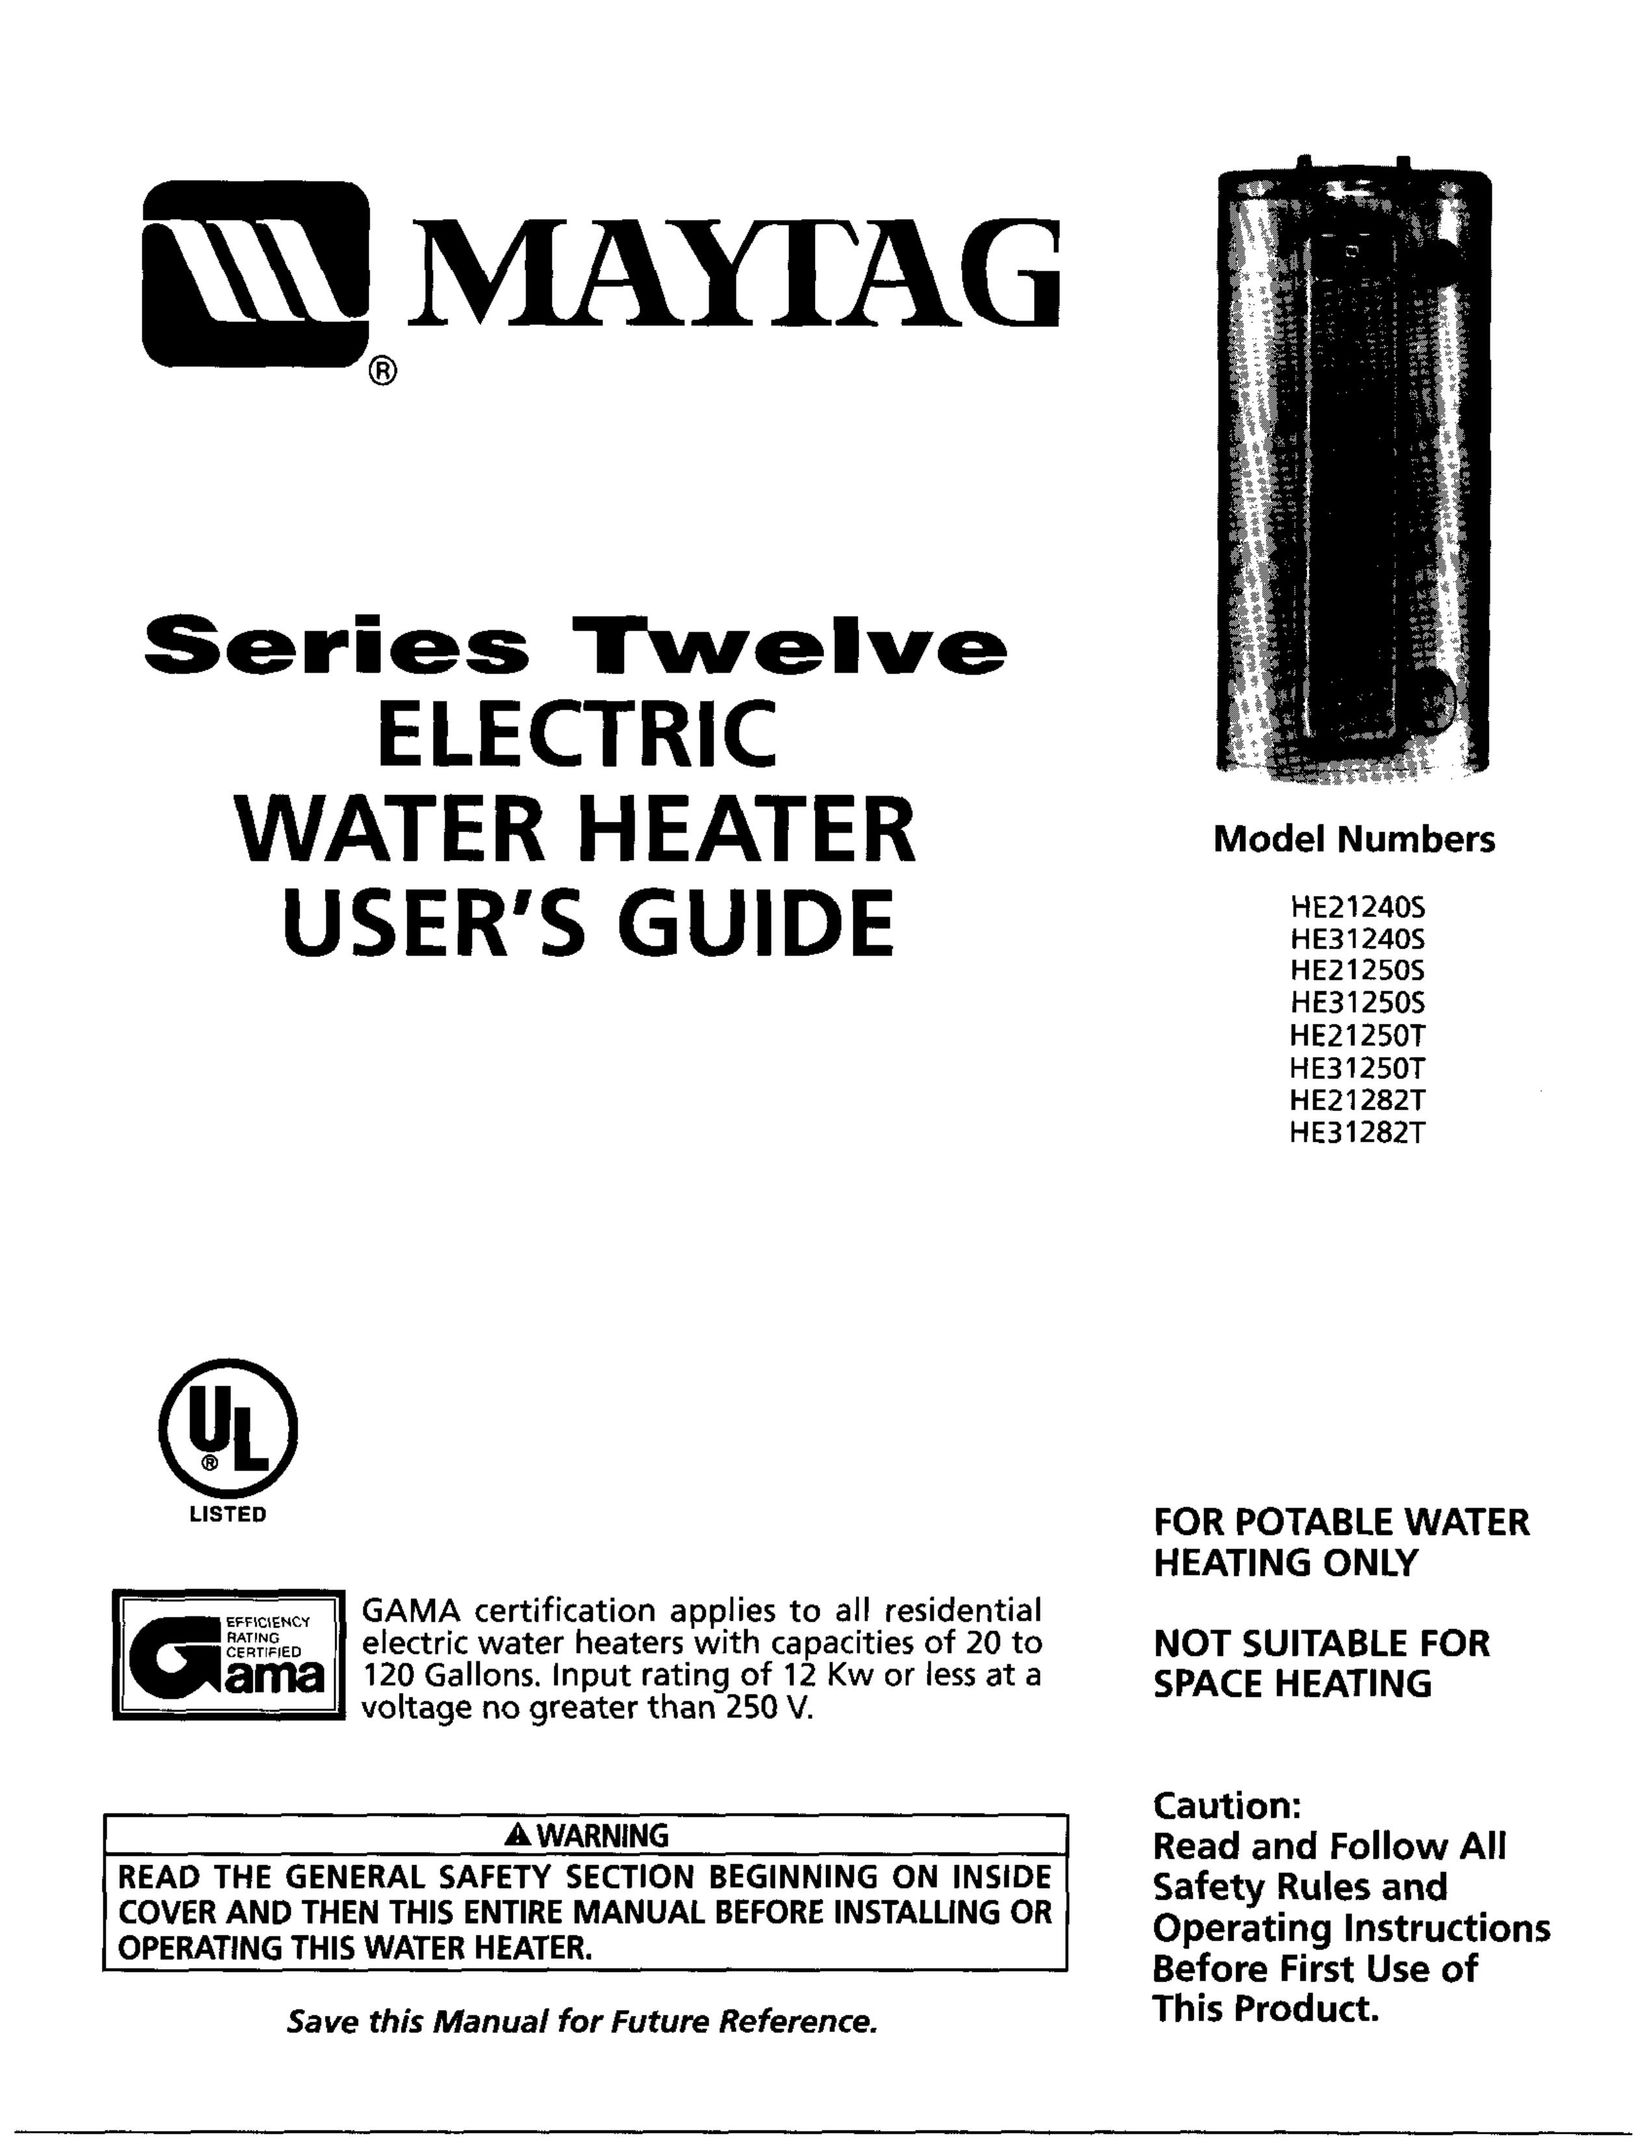 Maytag HE31250S Water Heater User Manual